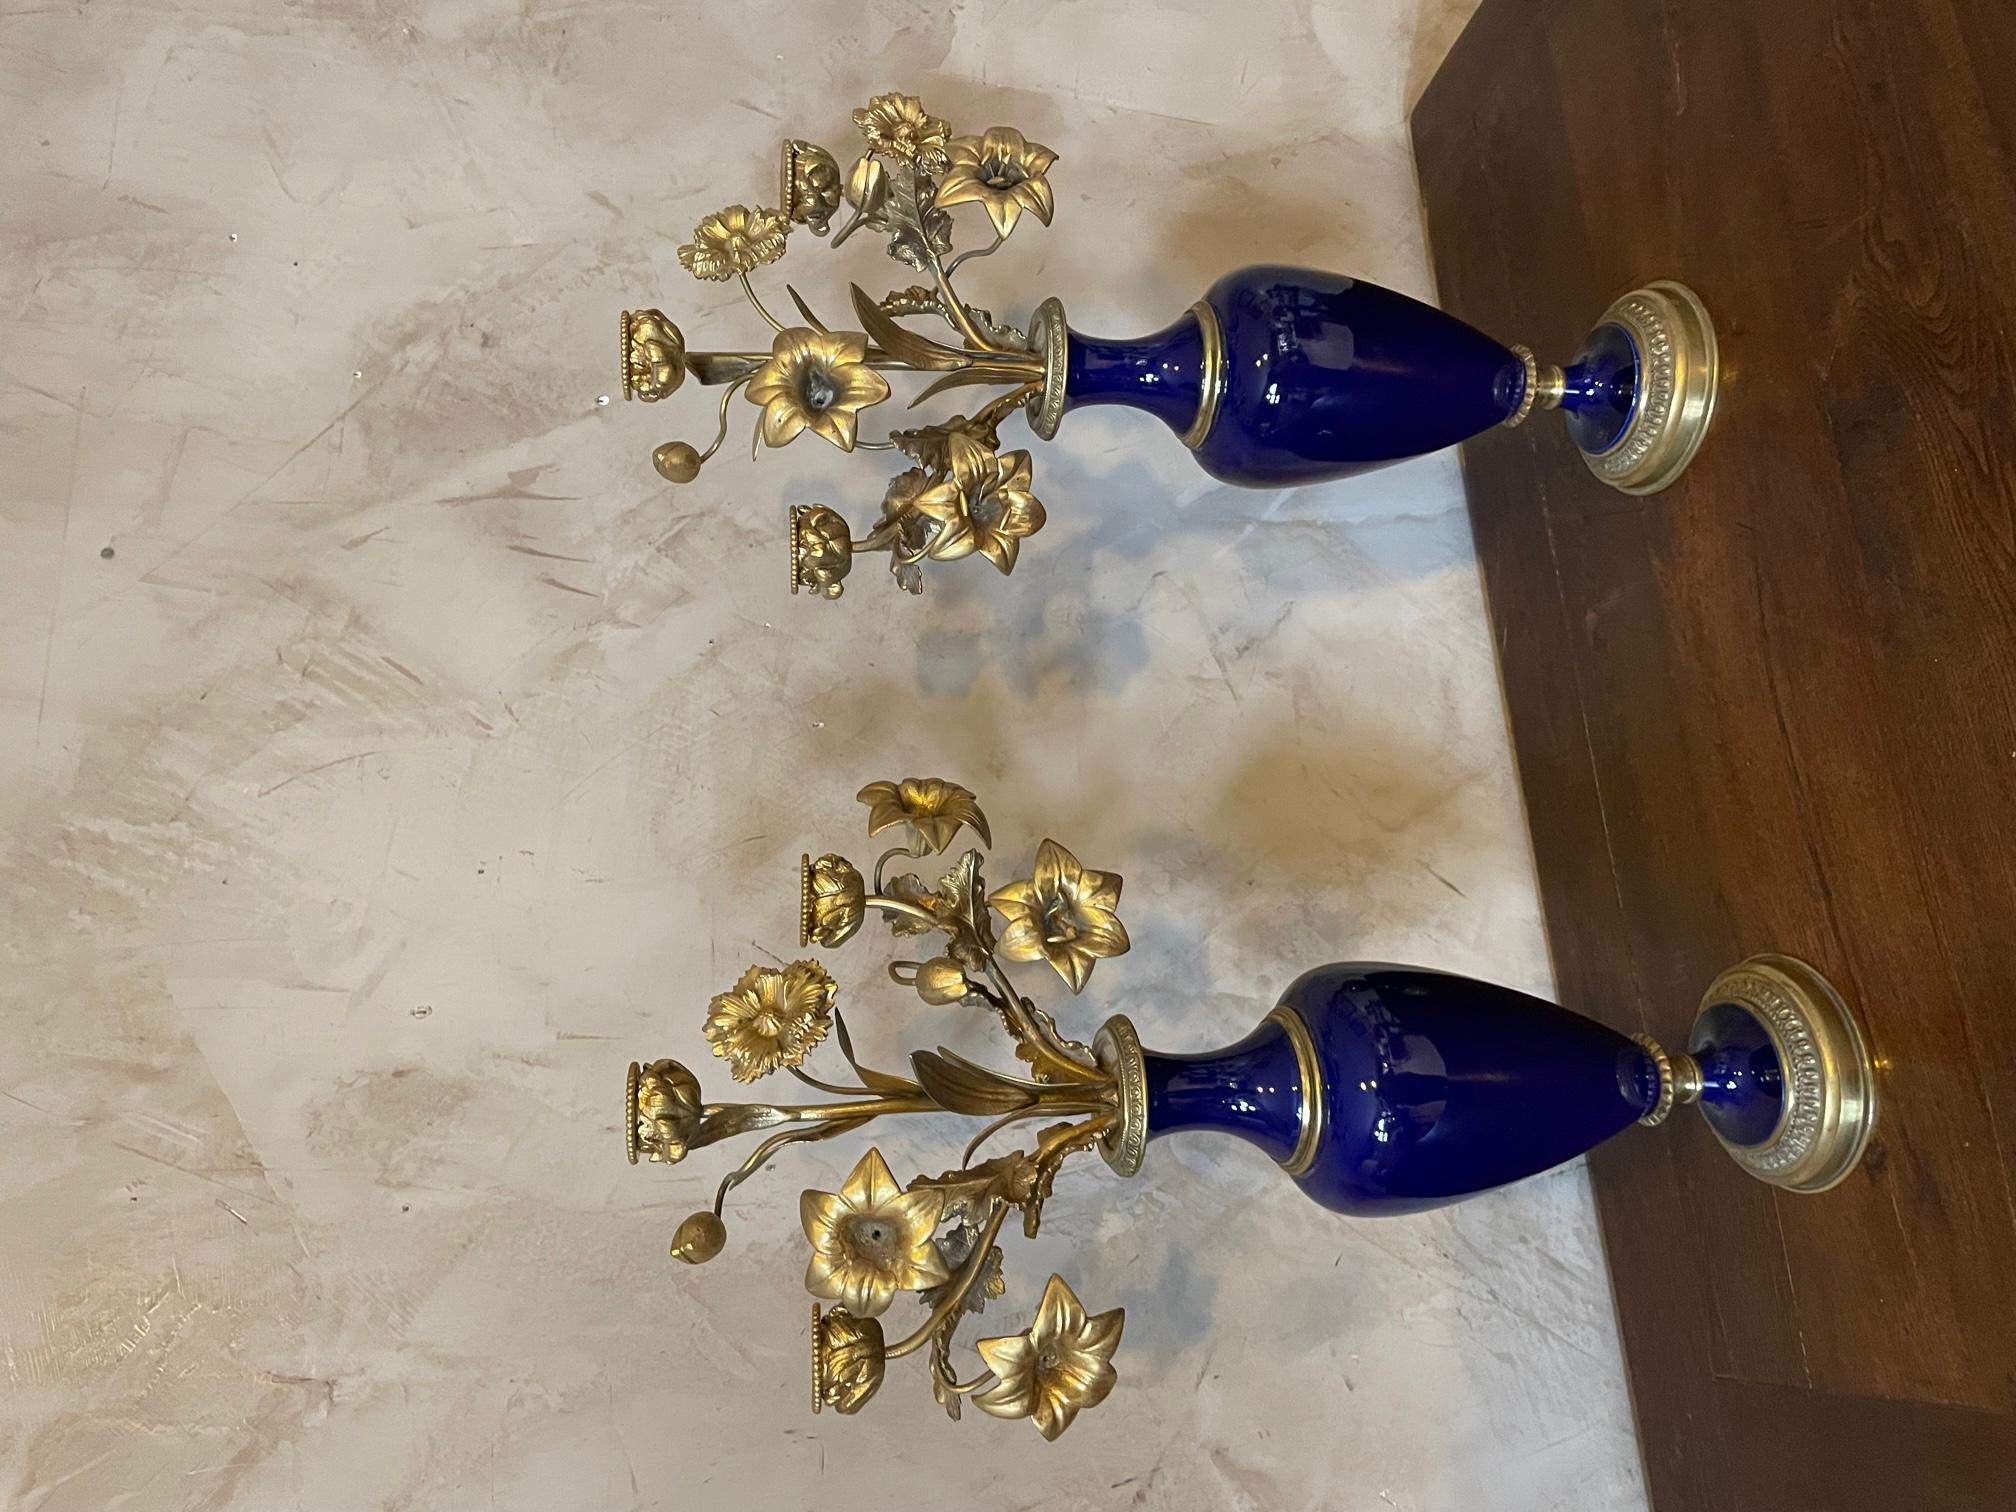 Pair of candelabras in gilded bronze and blue Sèvres porcelain dating from the end of the 19th century. Vases adorned with branches of roses and different flowers (a few pistils missing) 
Very elegant to decorate your table and your living room.